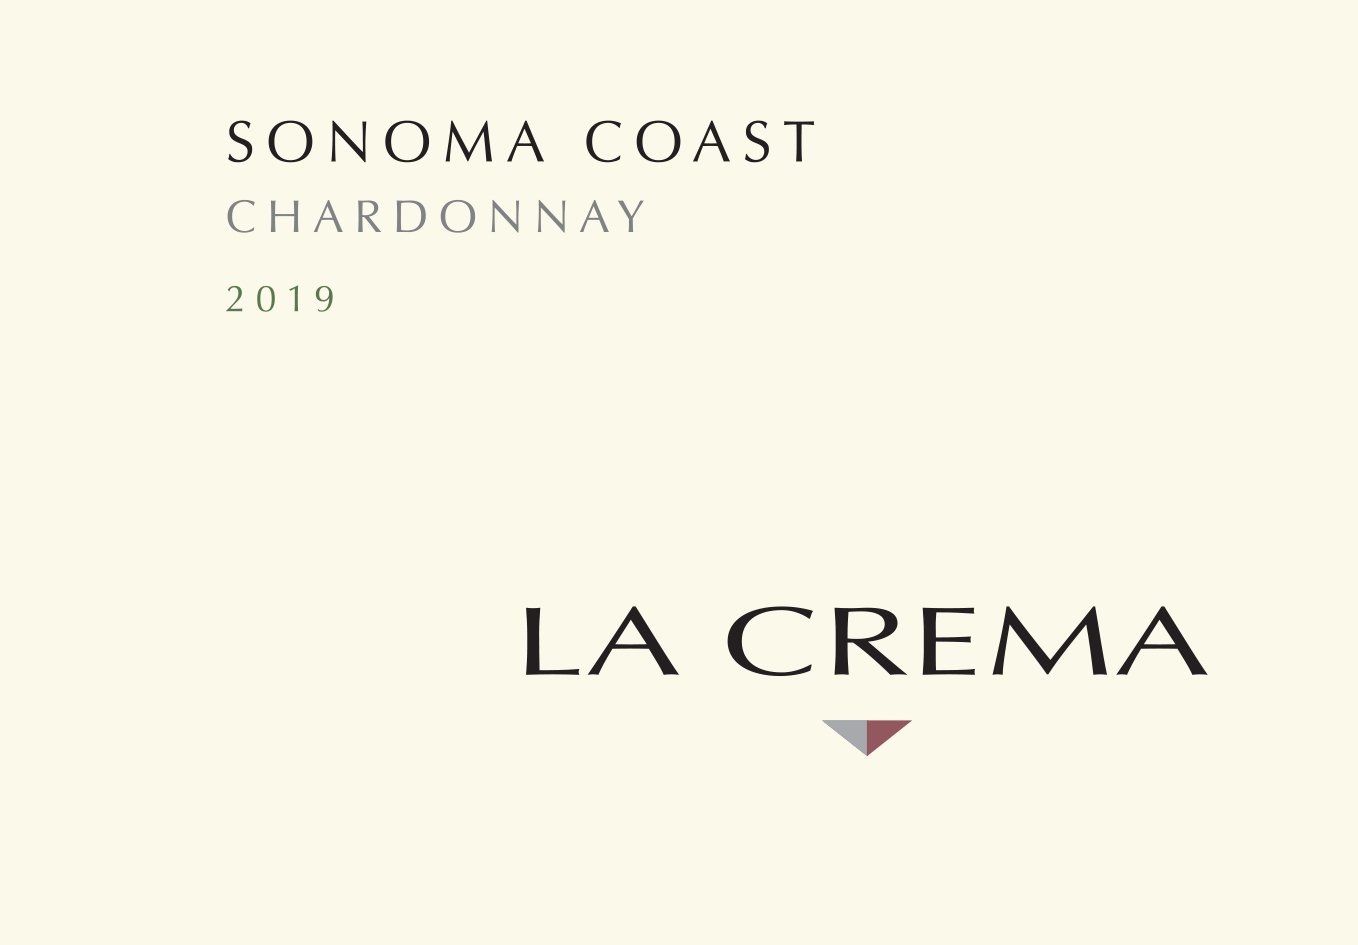    La Crema 2019 Sonoma Coast Chardonnay    ($23):&nbsp;   The winemaking team at La Crema has been perfecting Chardonnay for 40 years, and it shows. The 2019 Sonoma Coast Chardonnay is flavorful, bright, and juicy, making it an ideal pairing for a w